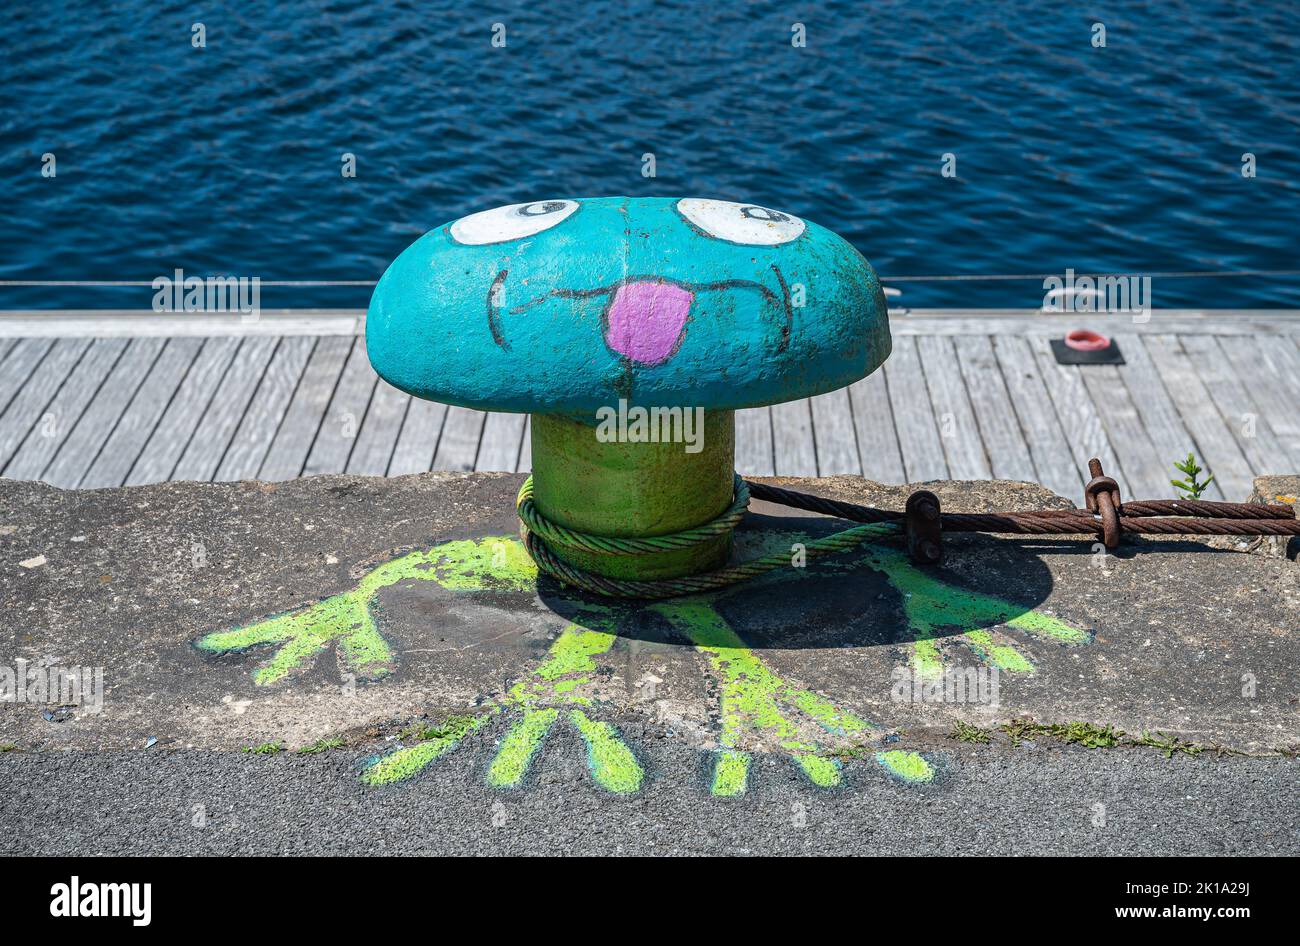 Europe, France, Dunkerque - July 9, 2022: Art closeup, bollard  on Port du Bassin de la Marine quay painted azure, green, white and pink as out of thi Stock Photo